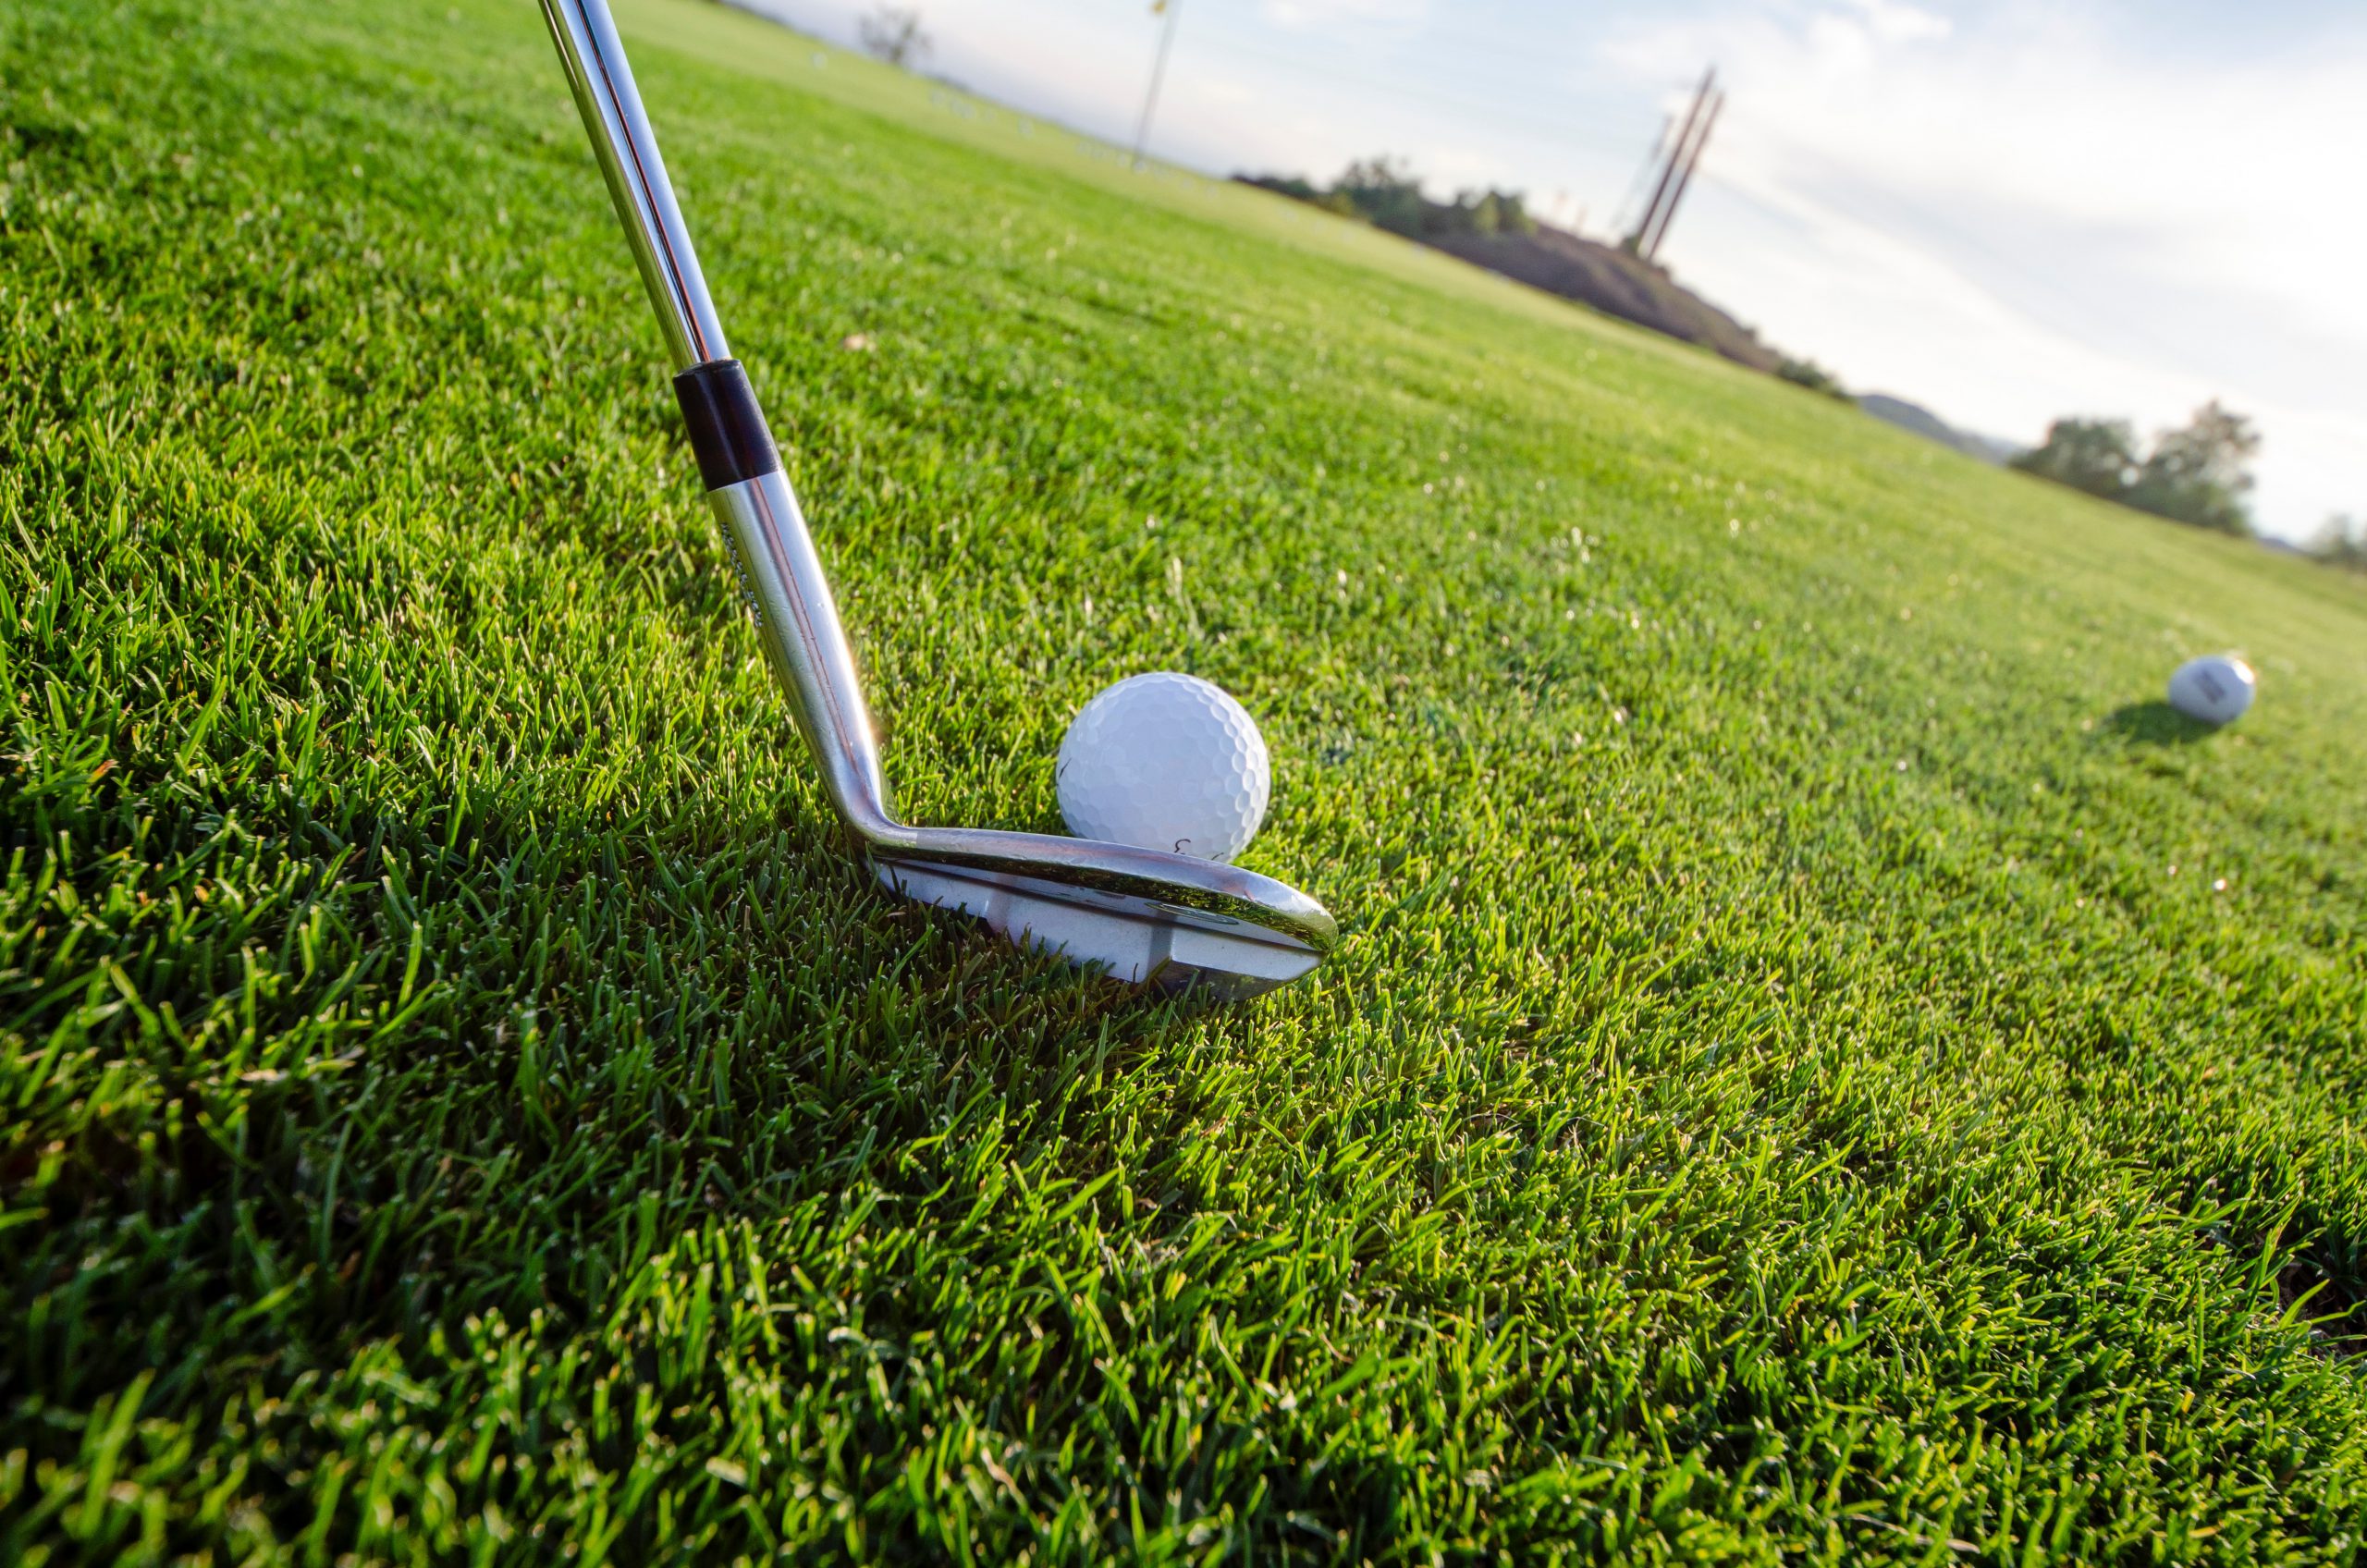 Spice Up Your Corporate Golf Events With These 10 Gifts For Golfers